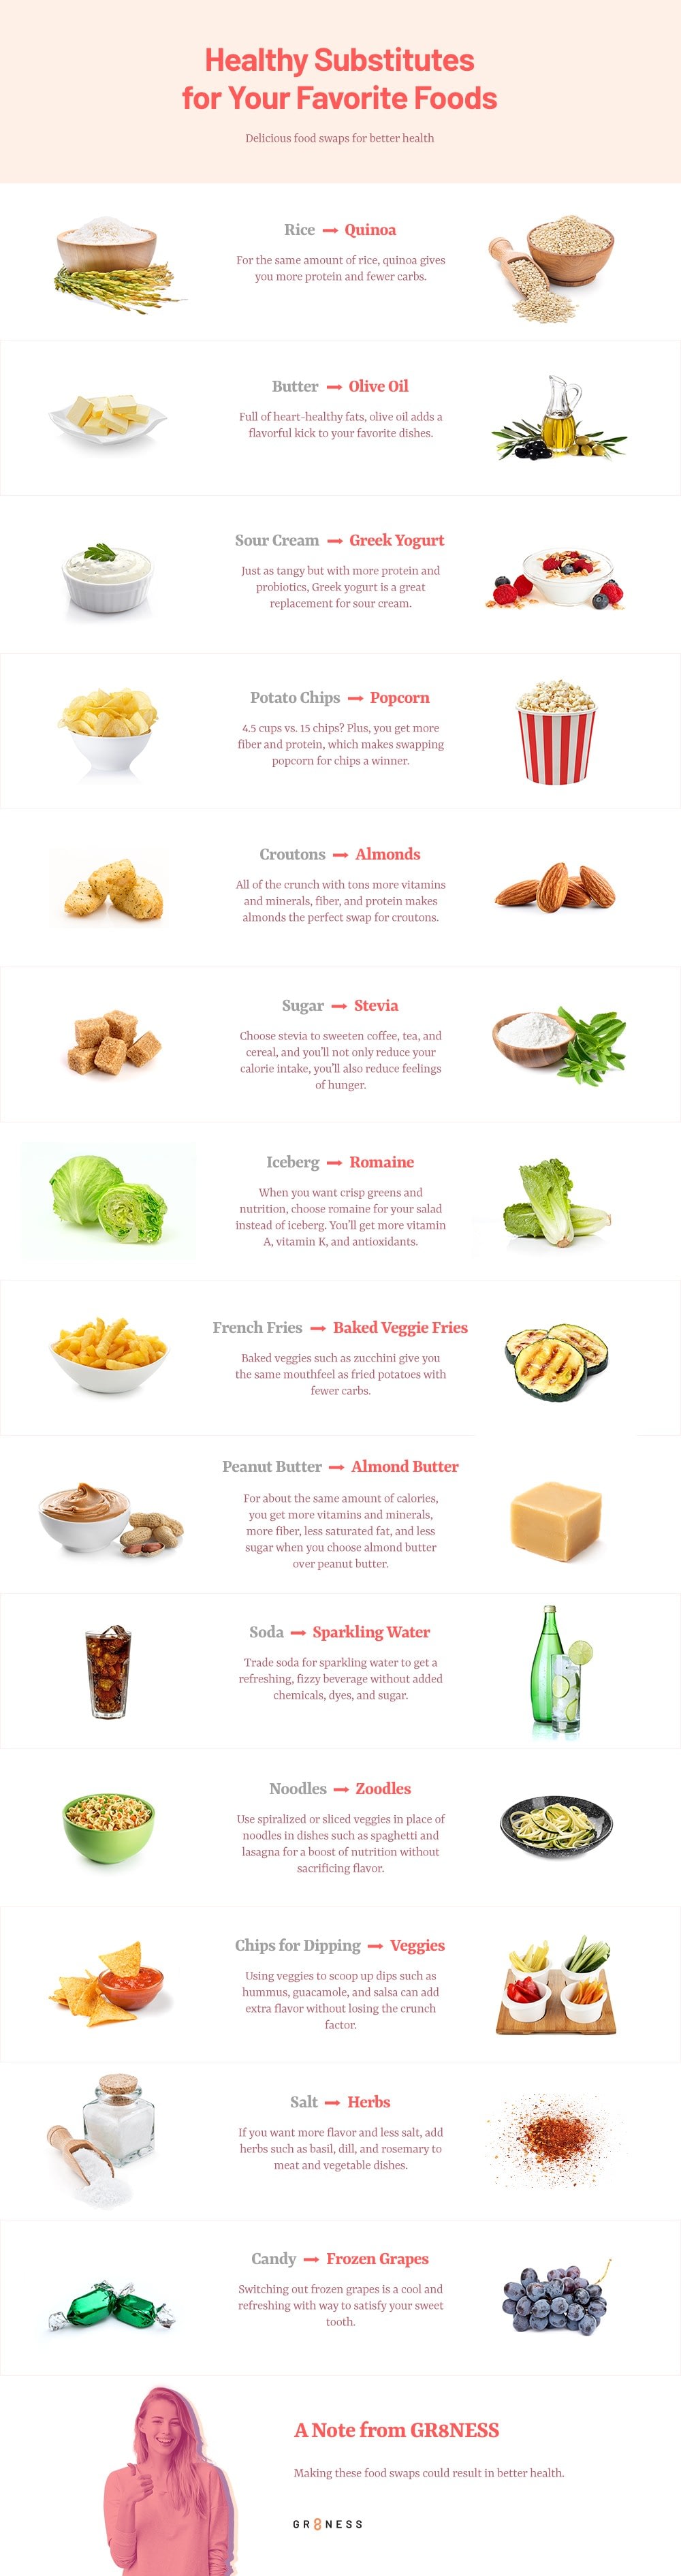 healthy food substitutes